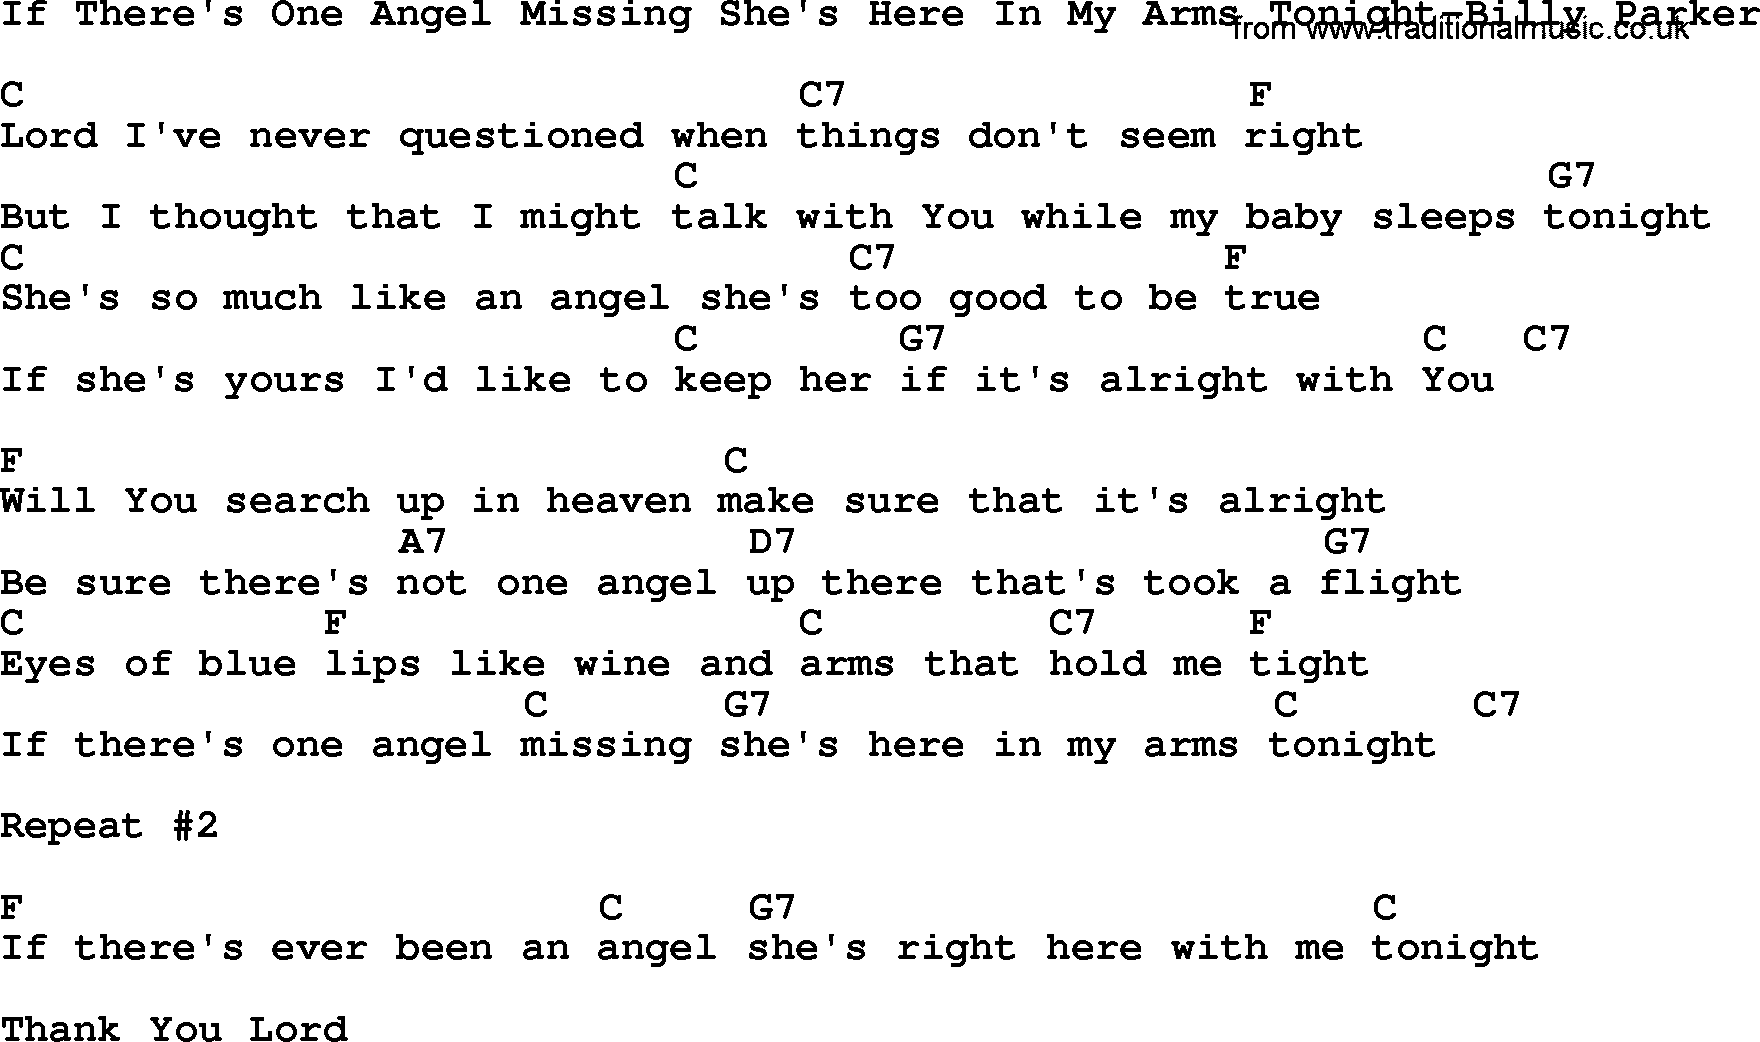 Country music song: If There's One Angel Missing She's Here In My Arms Tonight-Billy Parker lyrics and chords